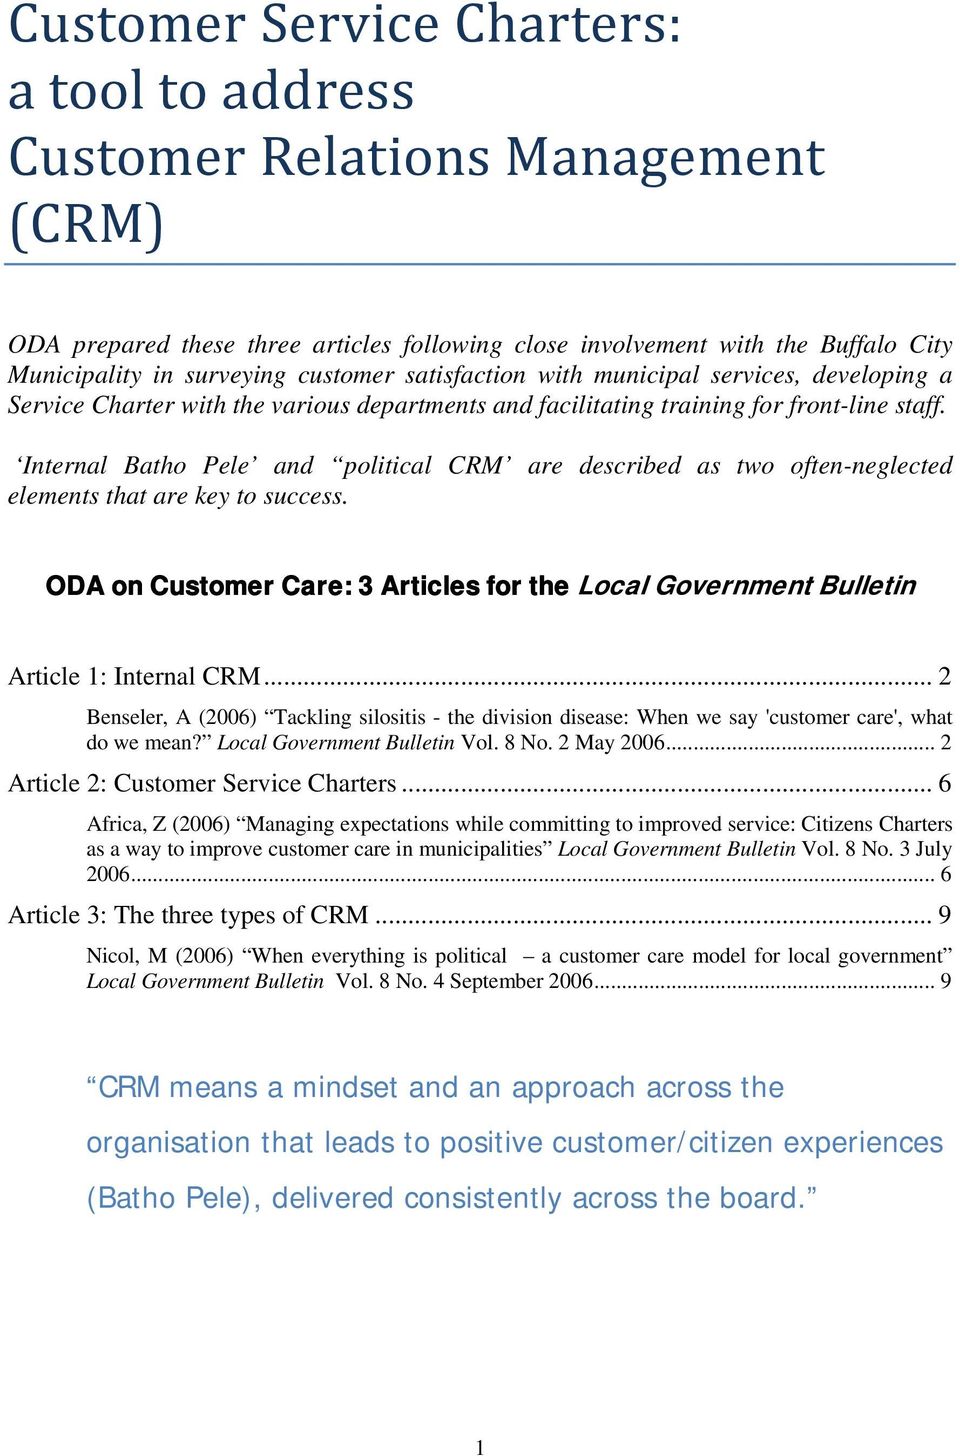 Internal Batho Pele and political CRM are described as two often-neglected elements that are key to success. ODA on Customer Care: 3 Articles for the Local Government Bulletin Article 1: Internal CRM.